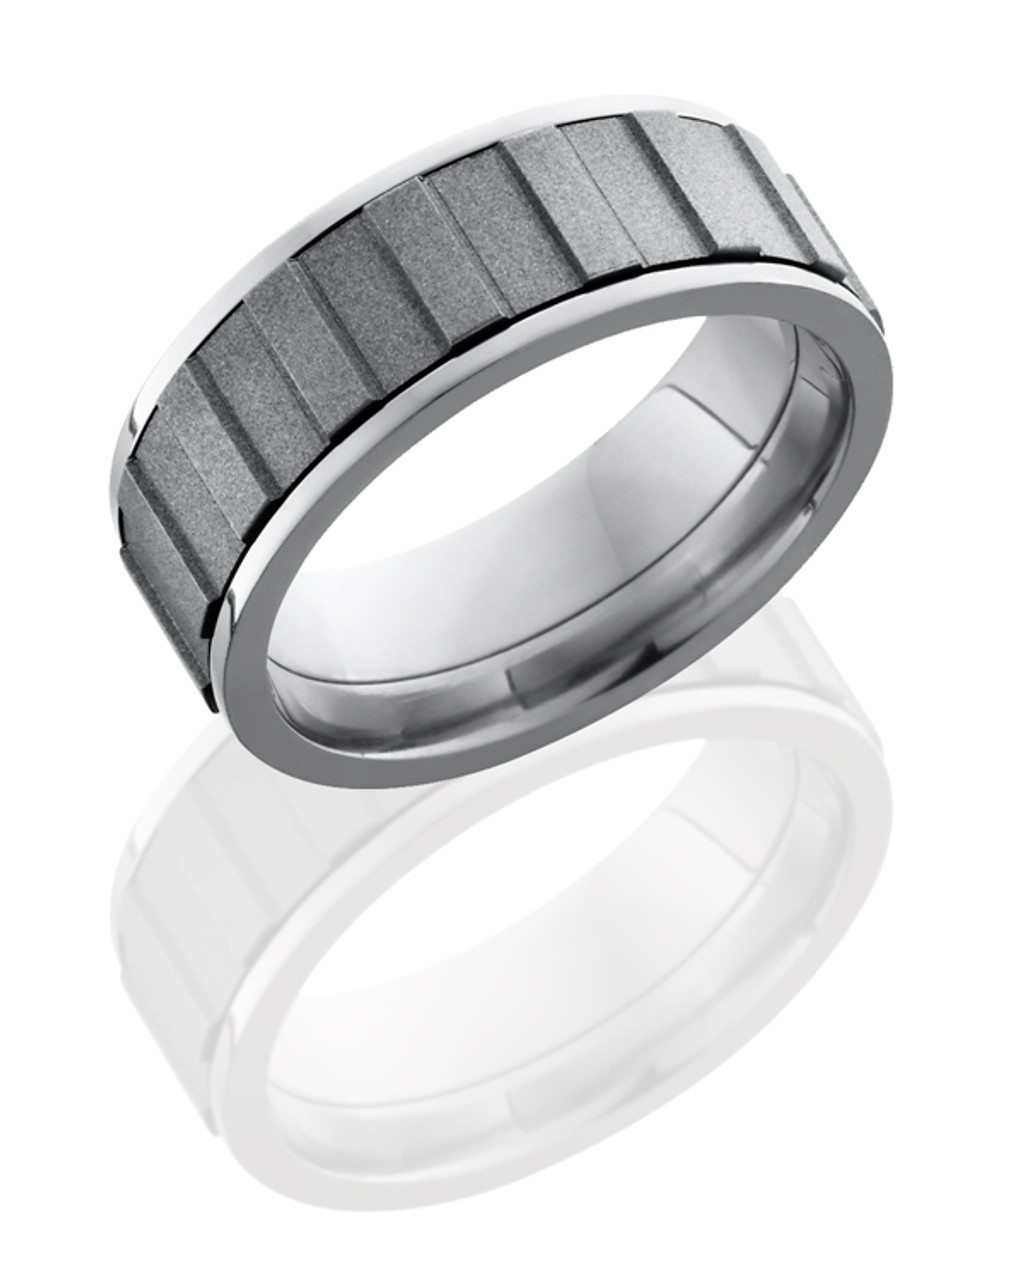 Polished Gear Spinner Ring | Free 